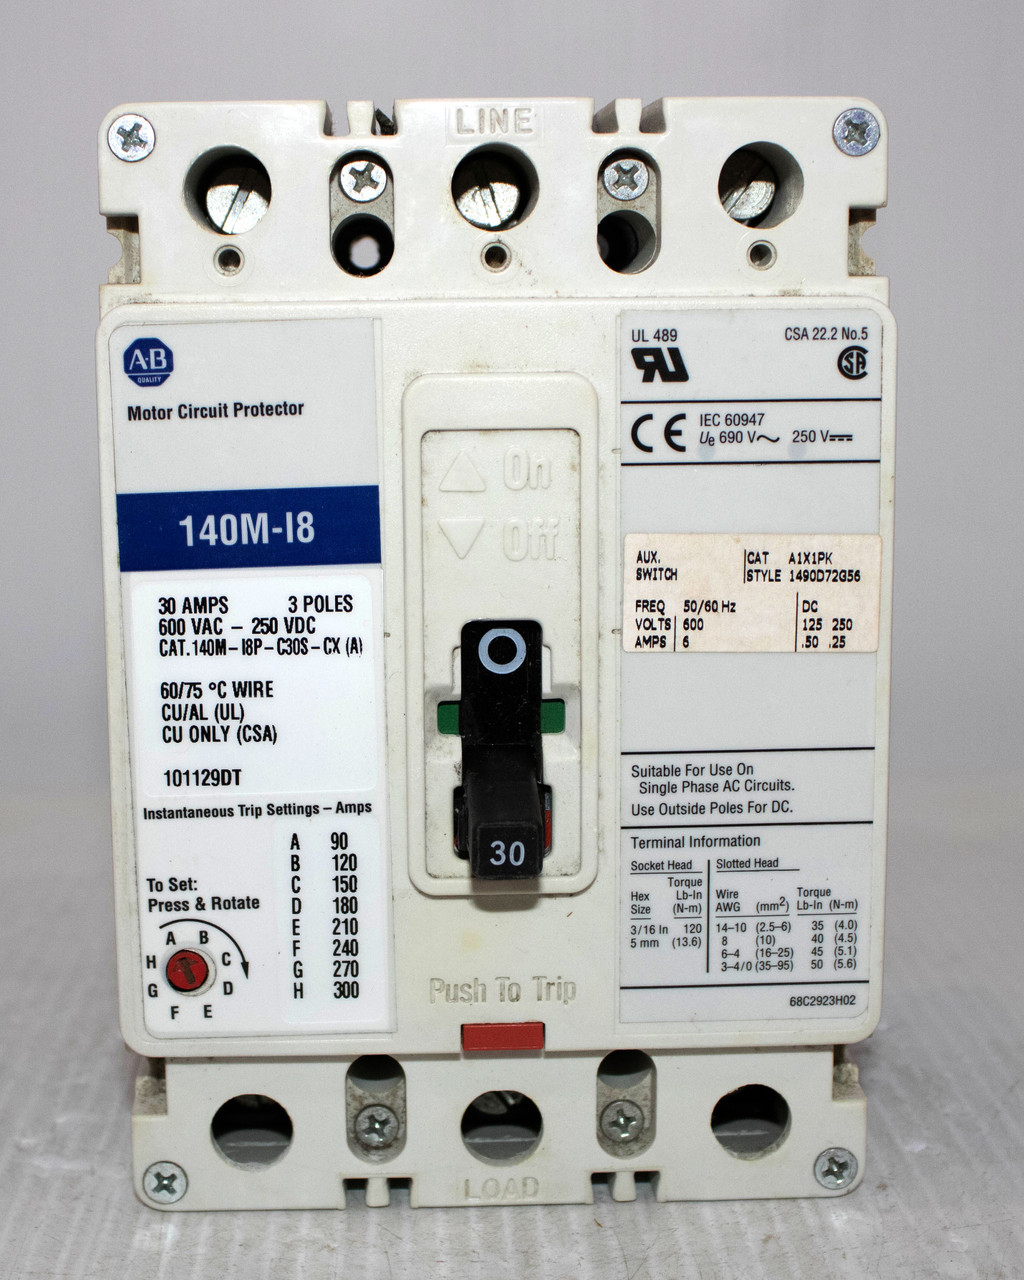 Allen-Bradley 140M-I8P-C30S-CX Breaker 30A 600V 3P Motor Circuit Protector